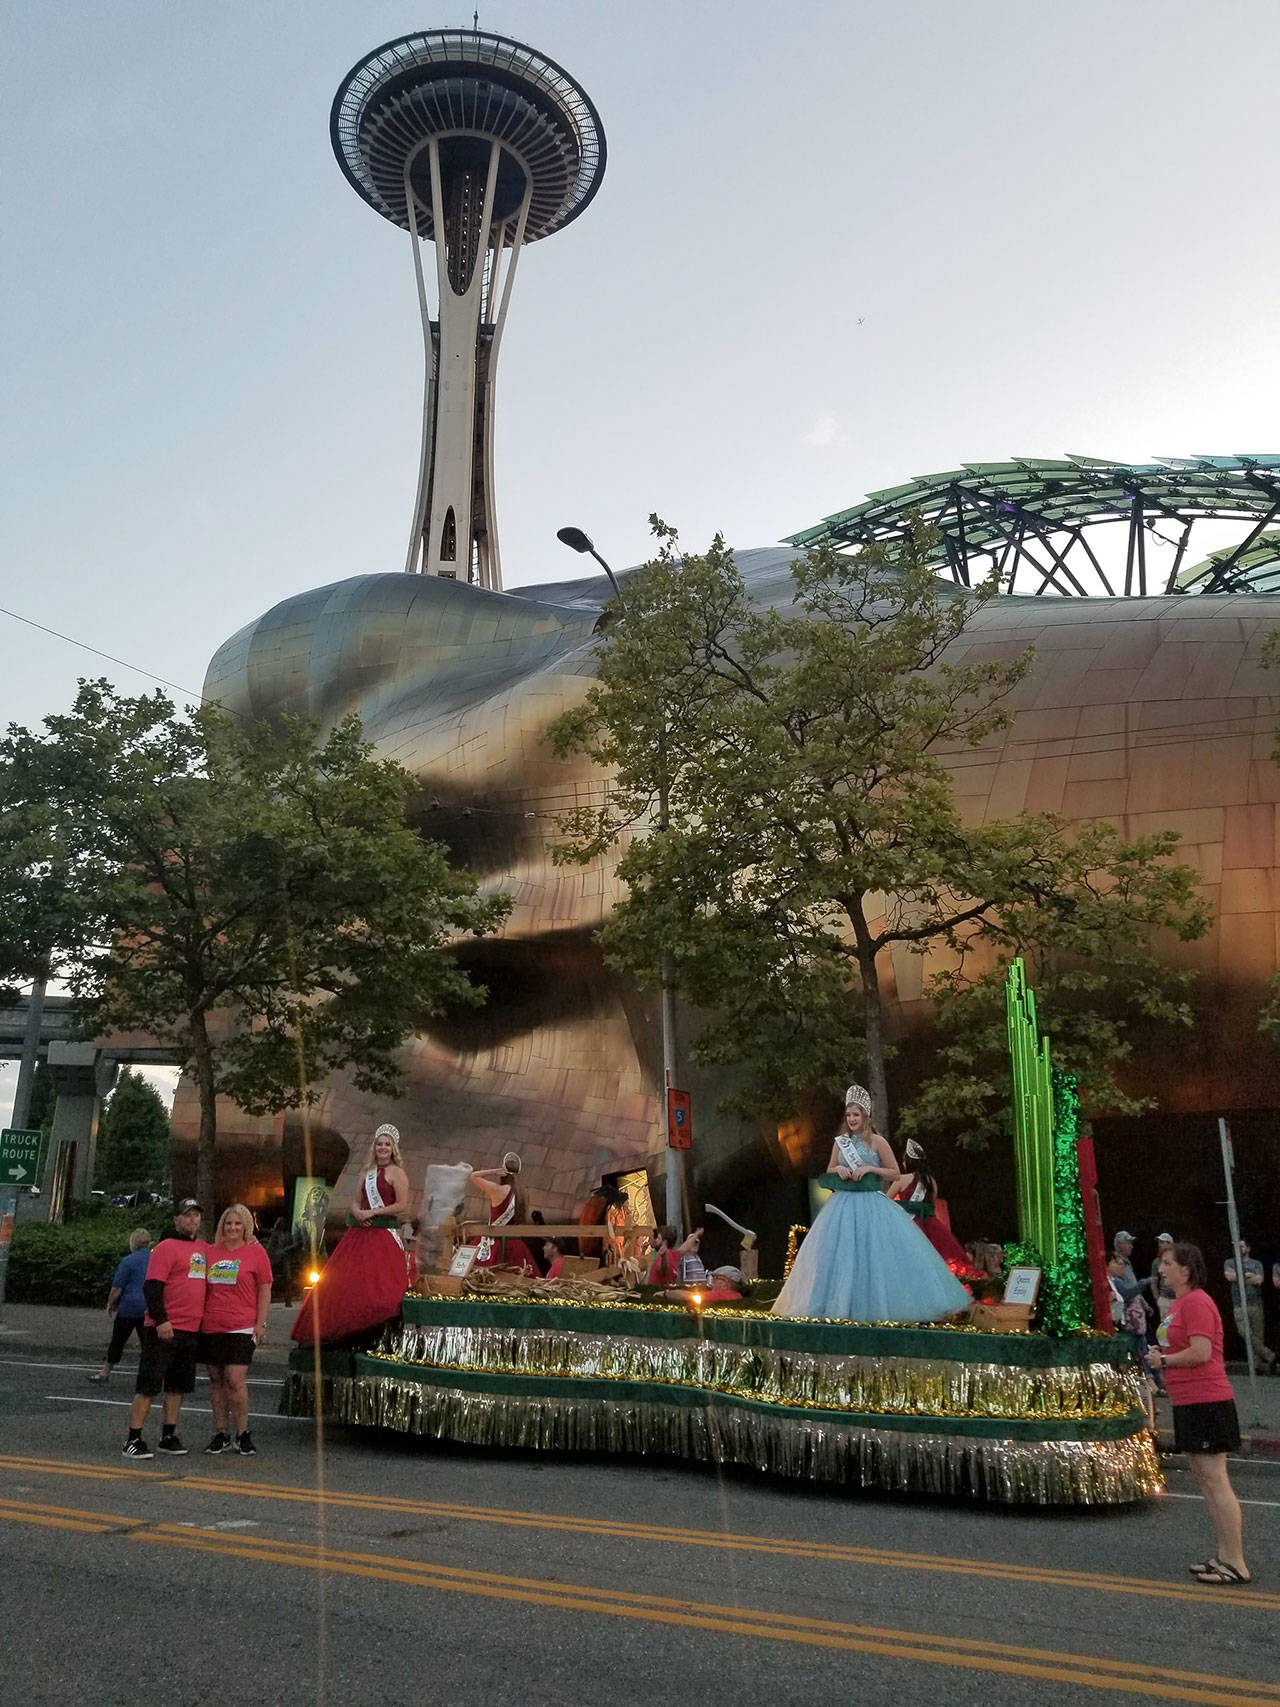 For the Torchlight Parade, volunteers and royalty with the Sequim Irrigation Festival parked below the Space Needle. That night, they won the “Light of the Night” award for their festive float based on the “Wizard of Oz.” Photo courtesy Jim Stoffer/Sequim Irrigation Festival